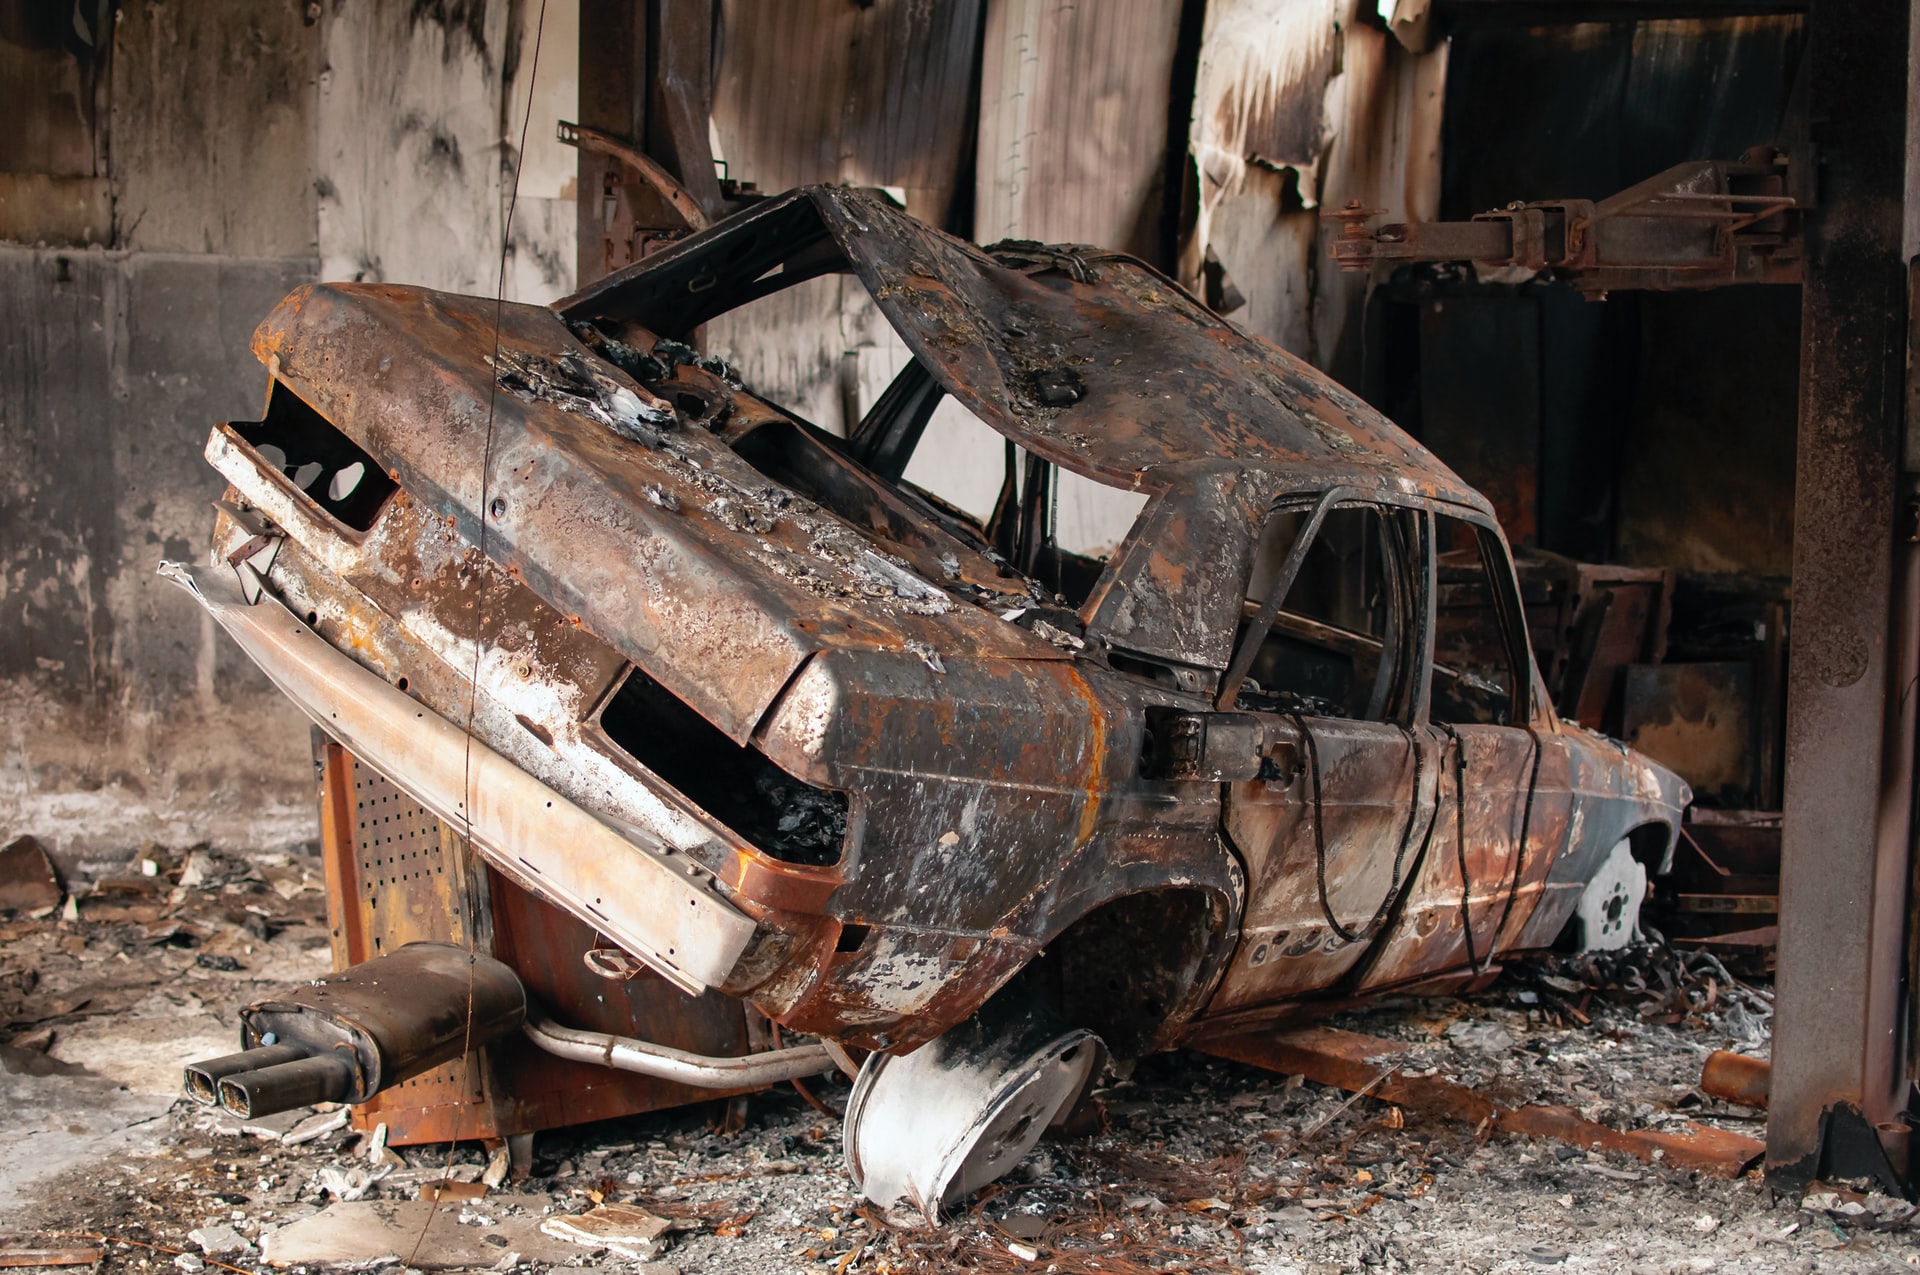 How to find a junkyard that buys used cars?